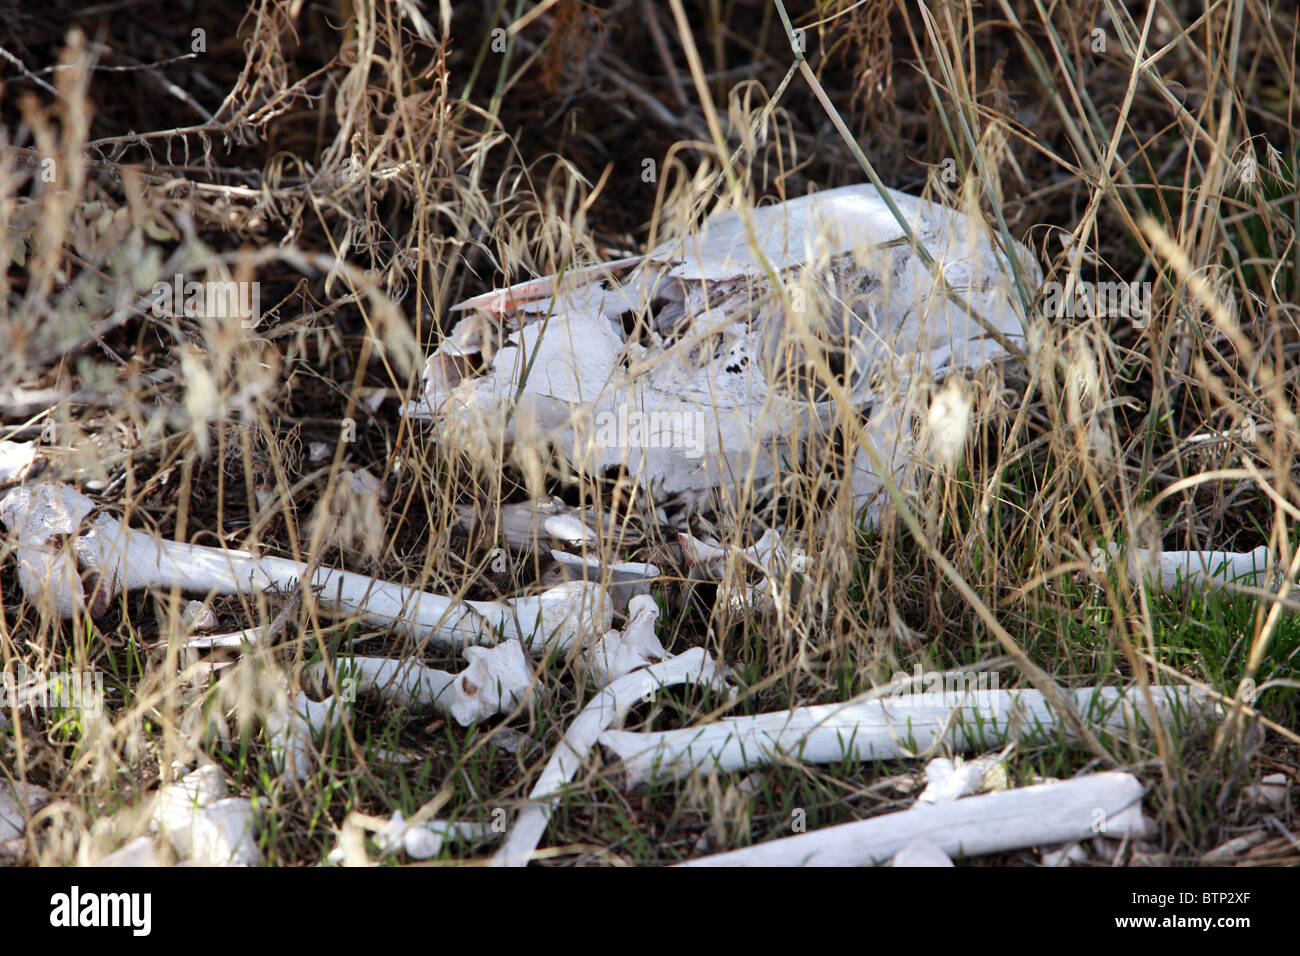 Bones of dead animal in dry grass. Skull and decayed bones bleached by sun. Deer animal dead. Stock Photo